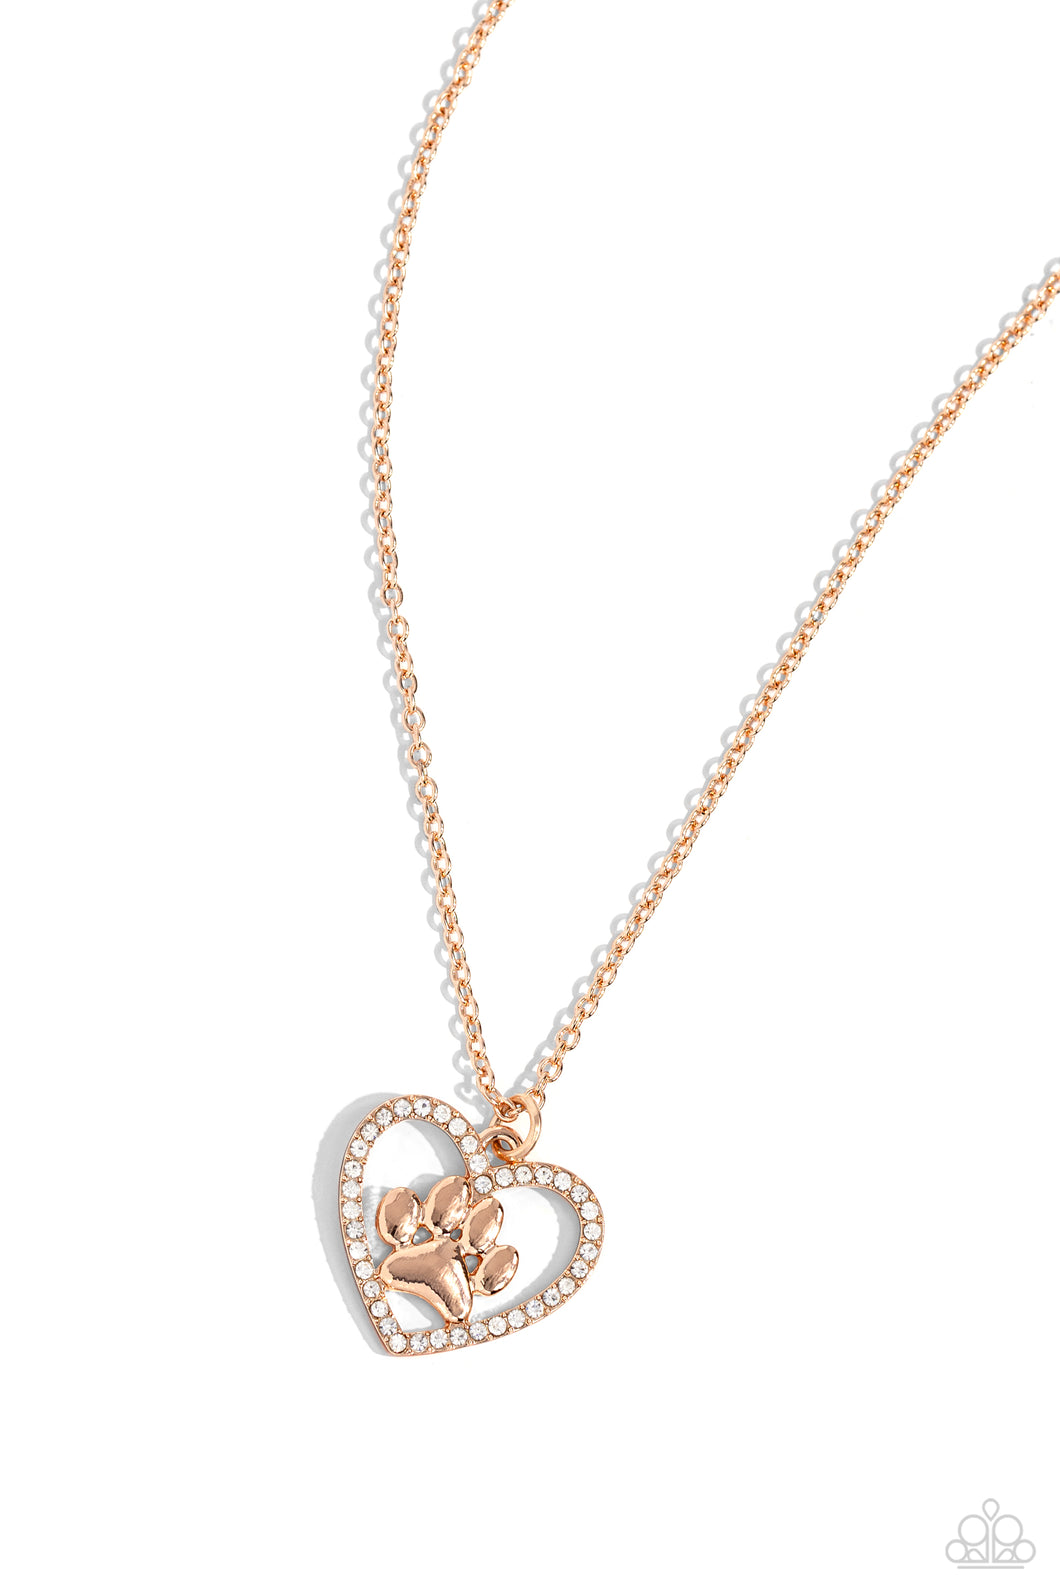 PET in Motion - Rose Gold paw print Paparazzi necklace